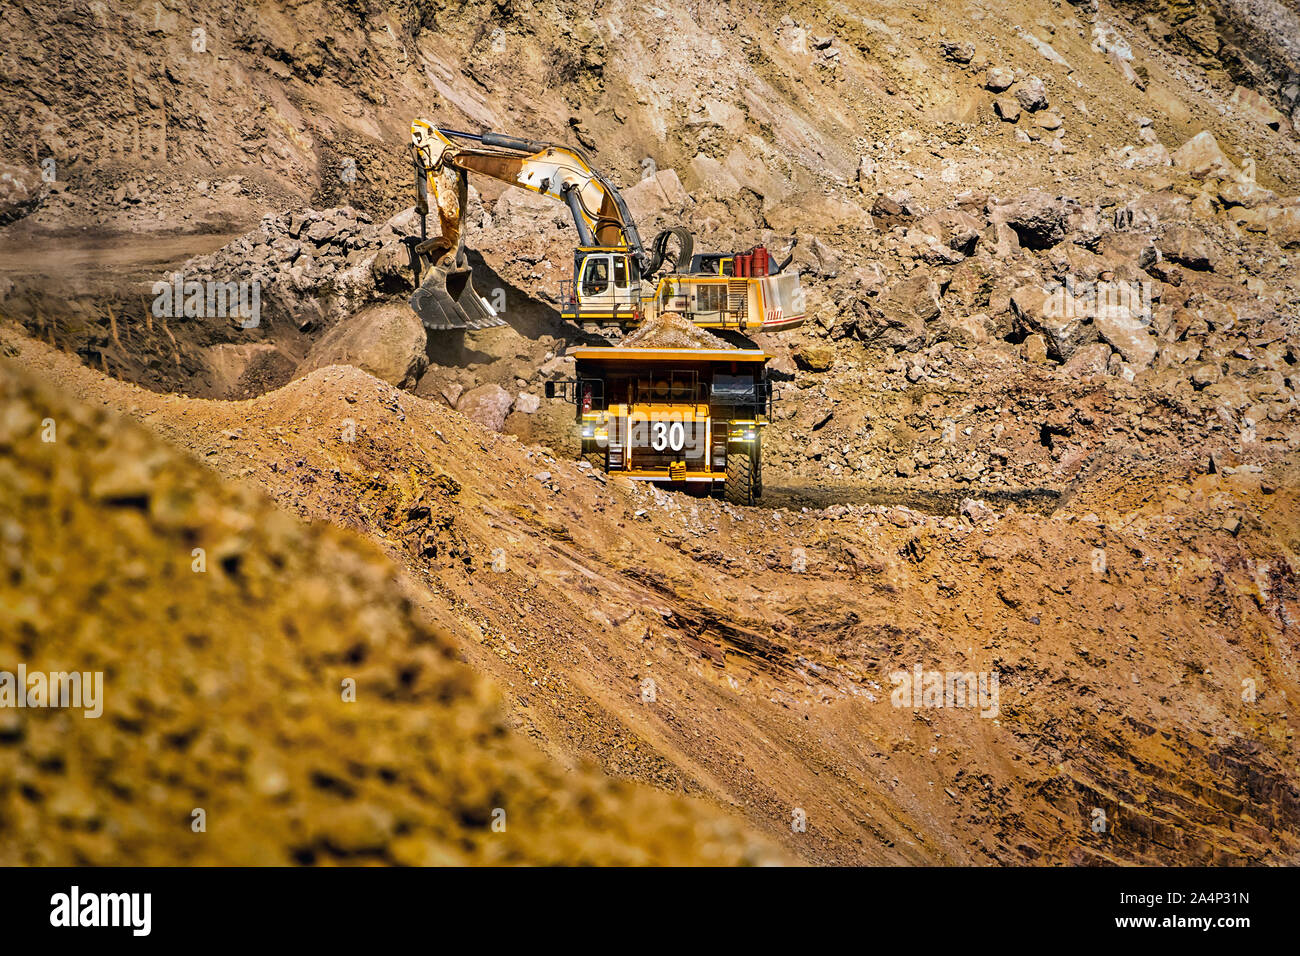 An open pit diamond mine in Botswana with heavy machinery on site. Stock Photo